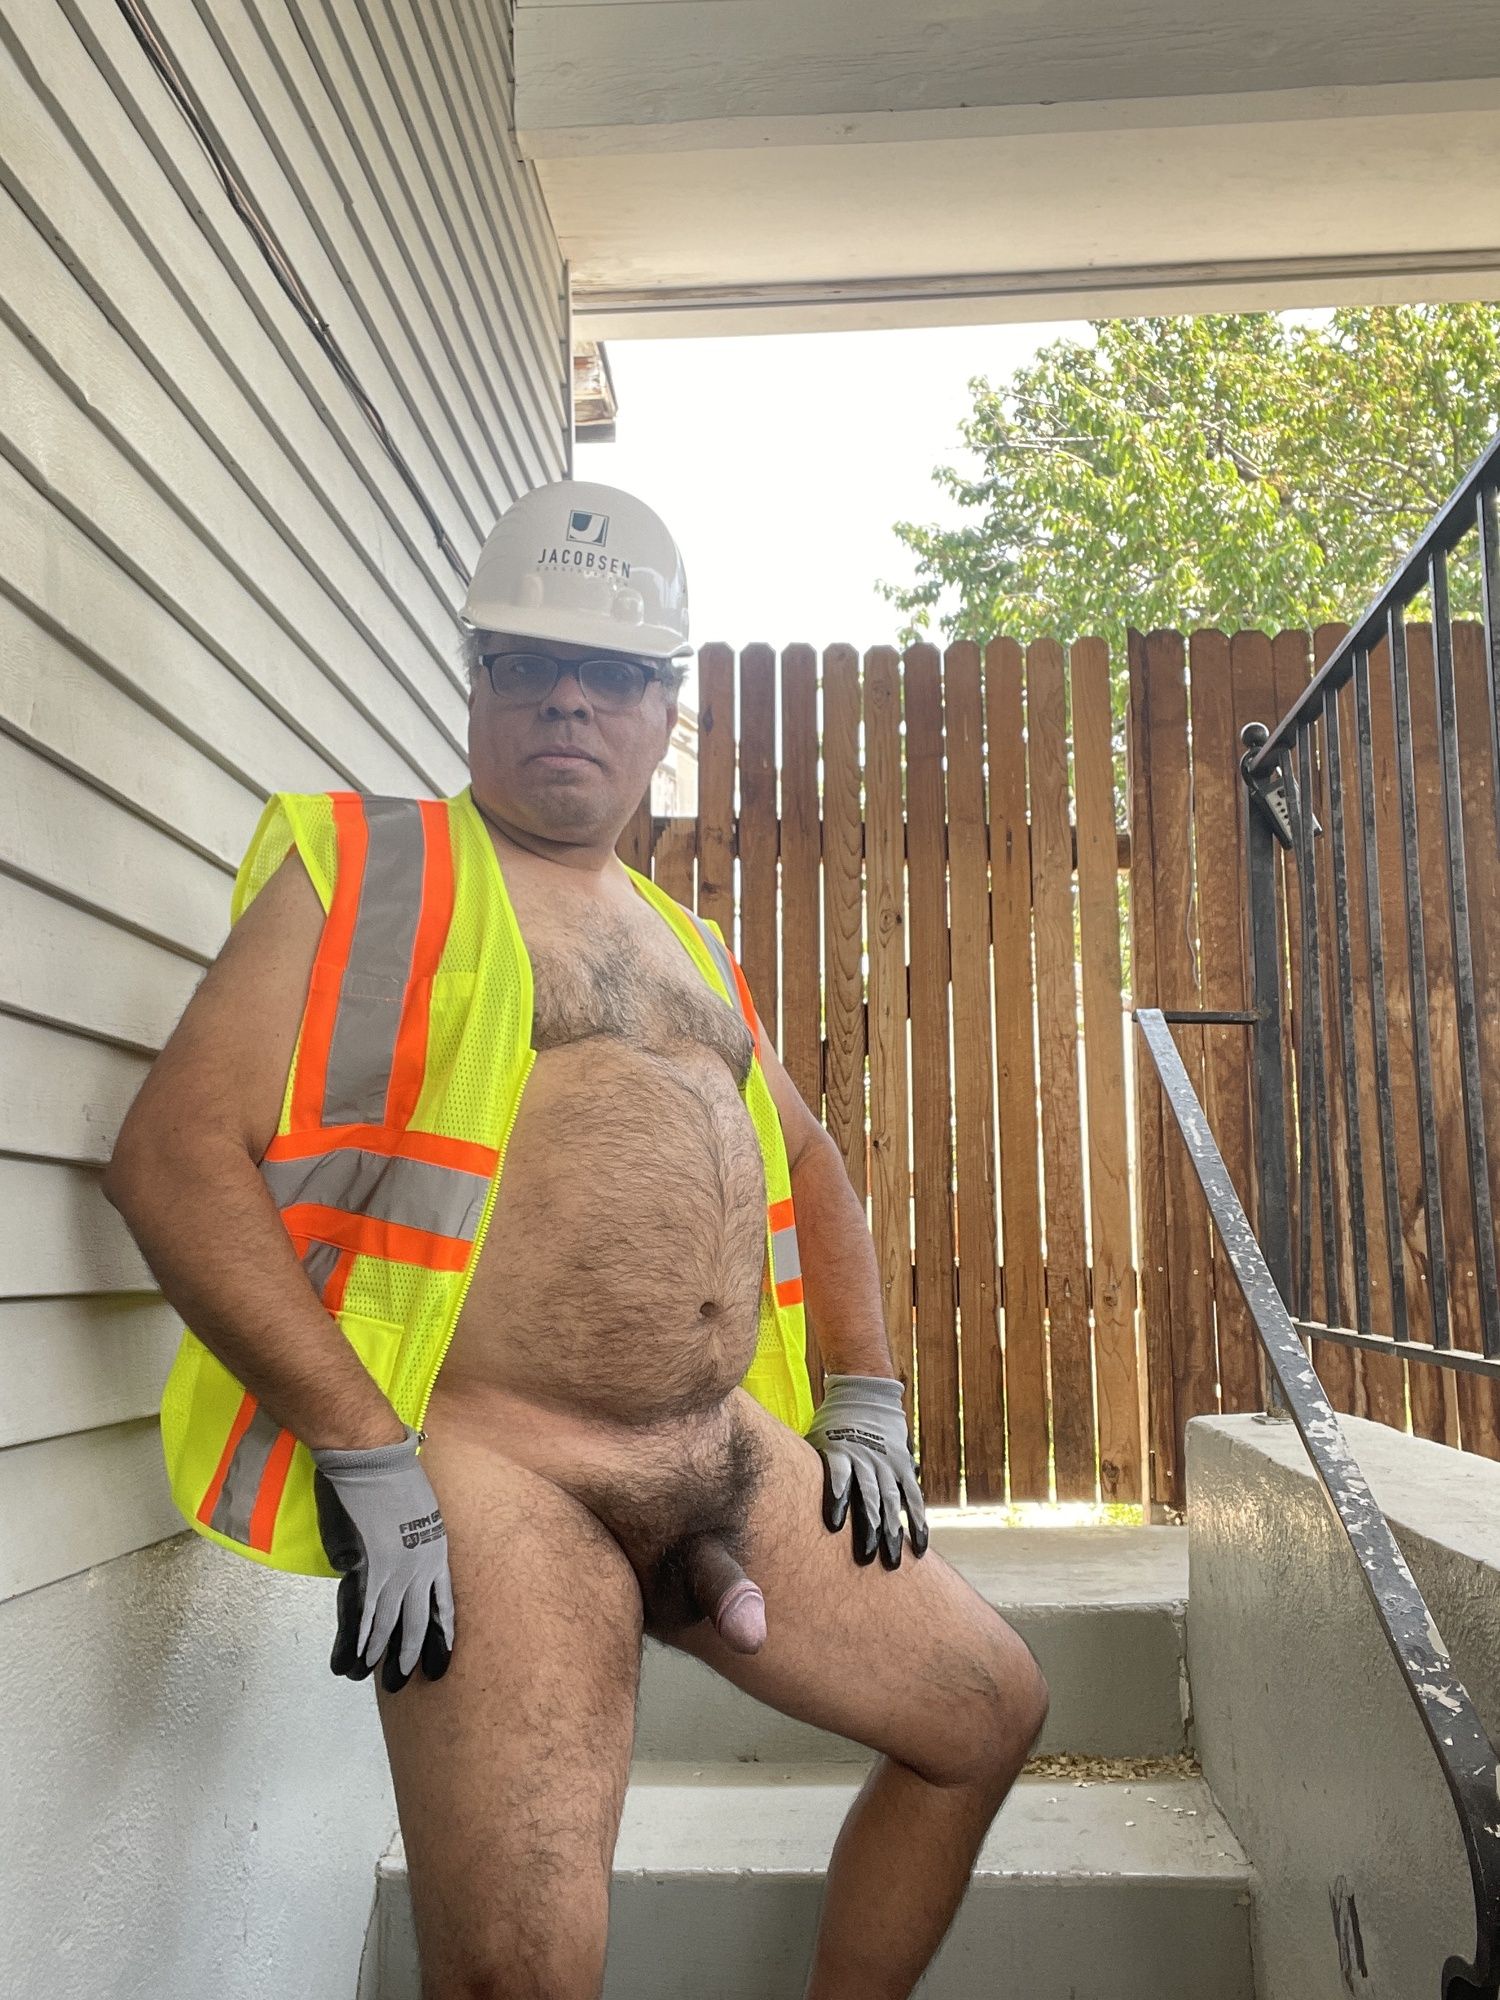 The Hard Construction Worker #3